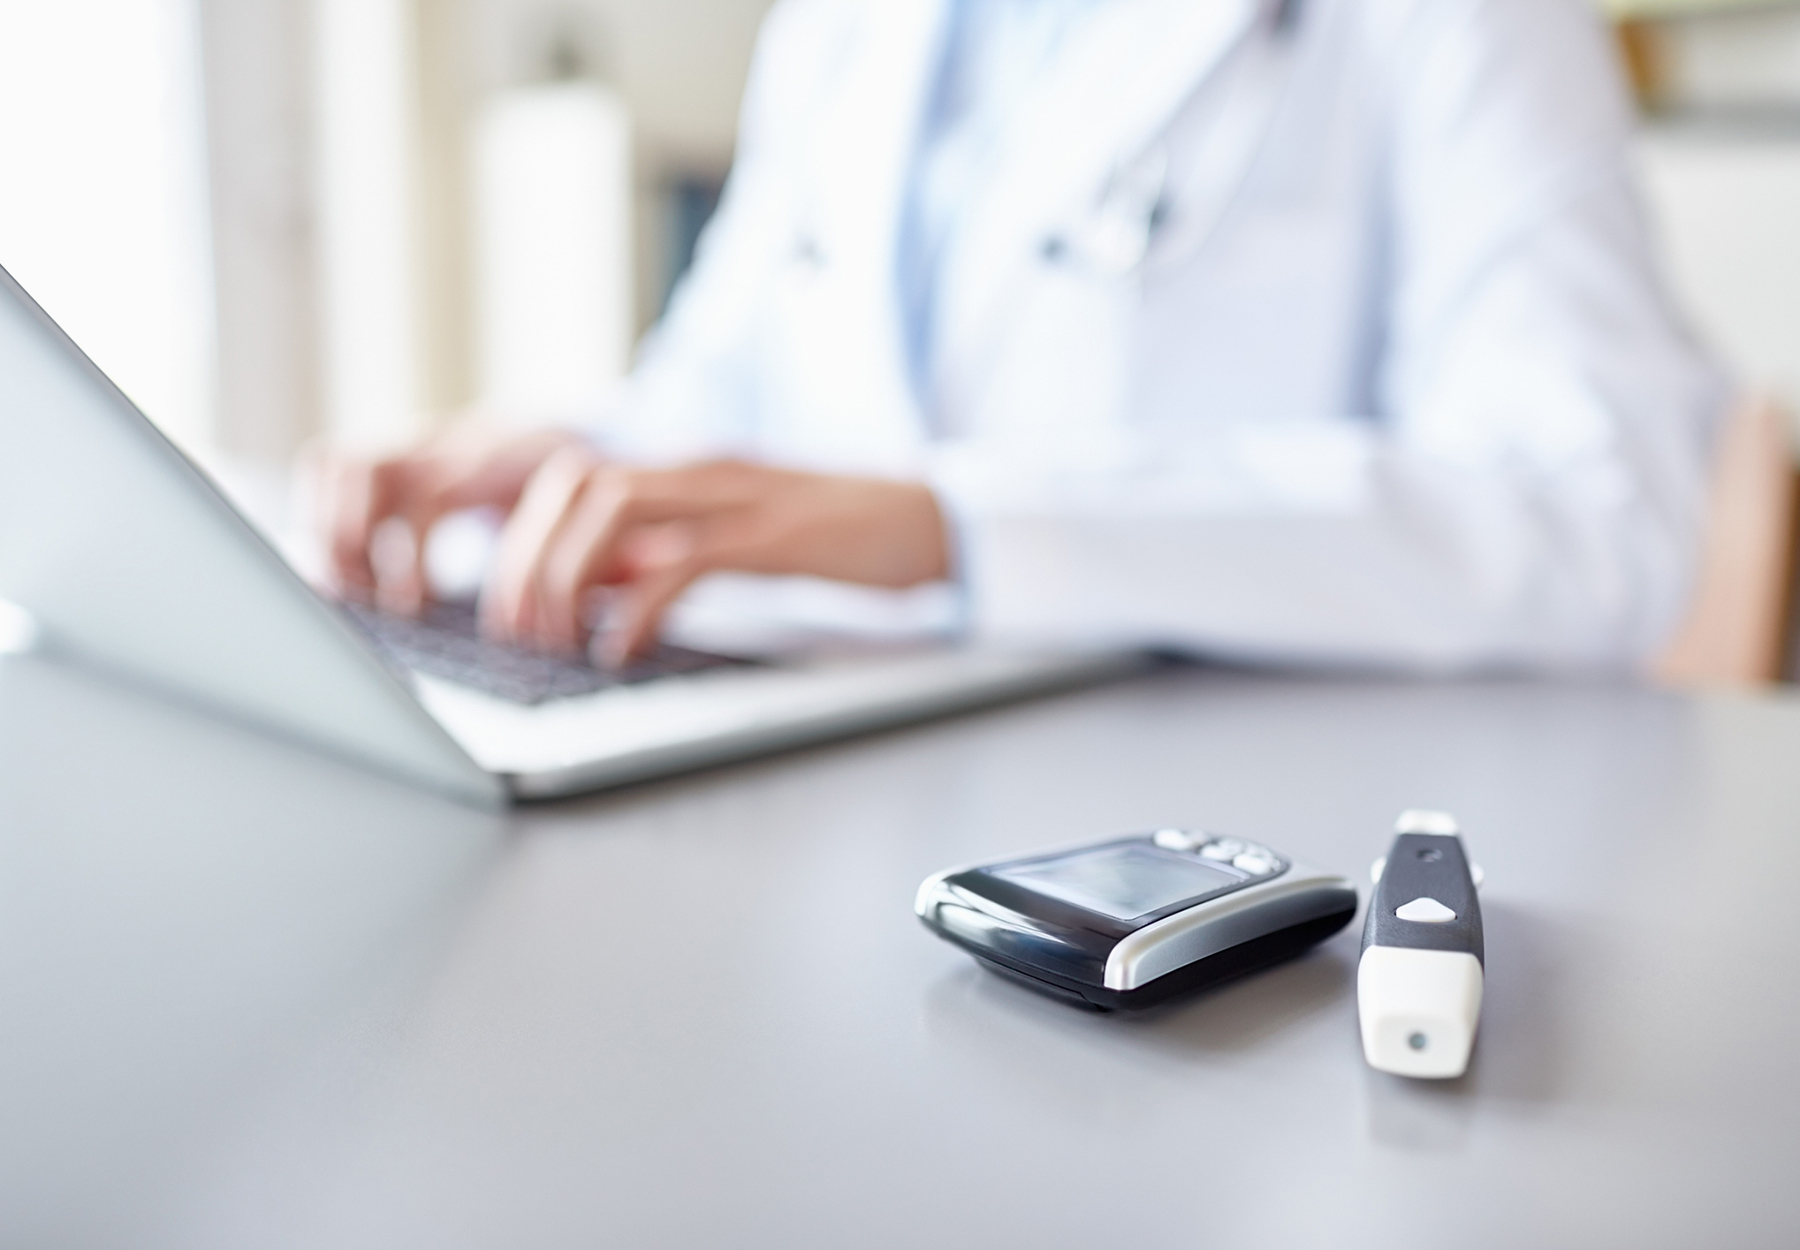 Close-up of glucometers on desk with female doctor using laptop in background wearing lab coat and stethoscope. Stock image.